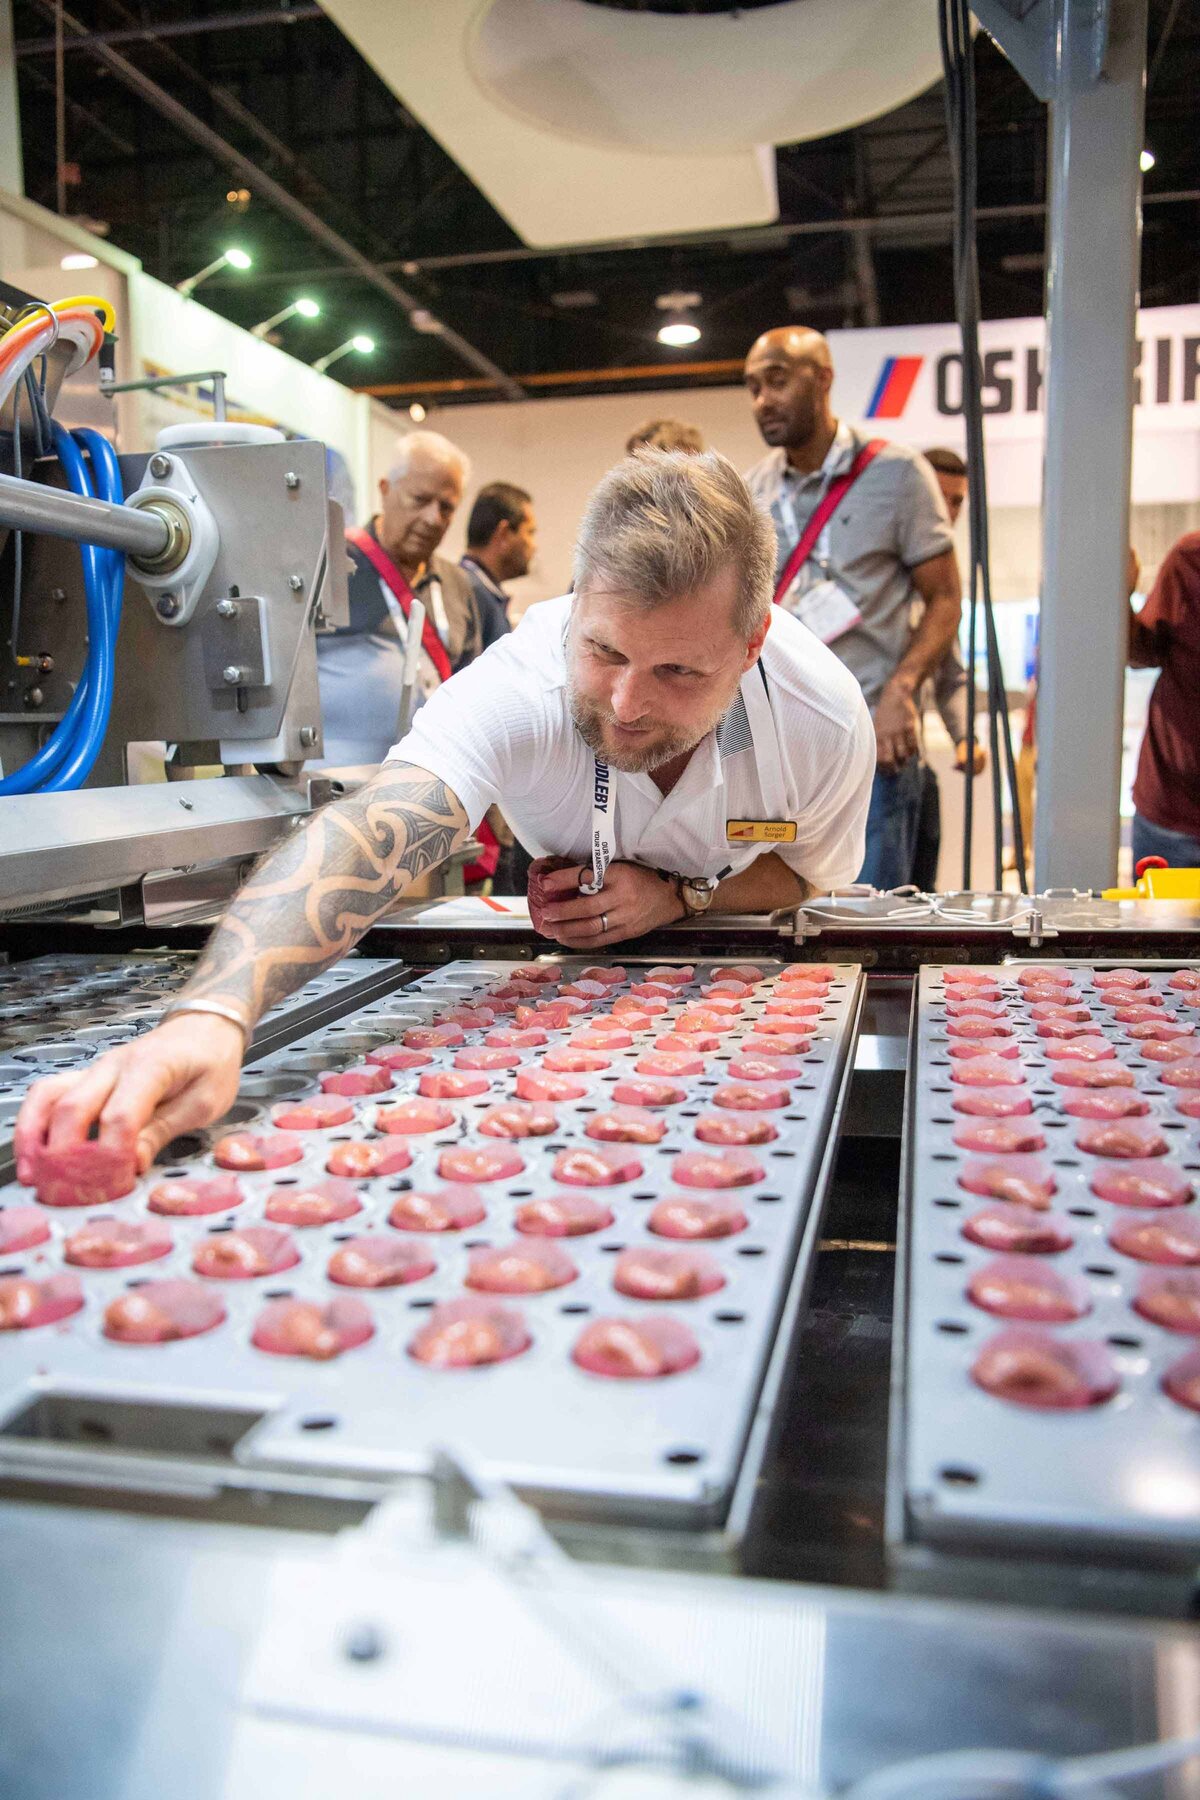 A man reaches to remove  cupcakes from a machine as people look on from behind